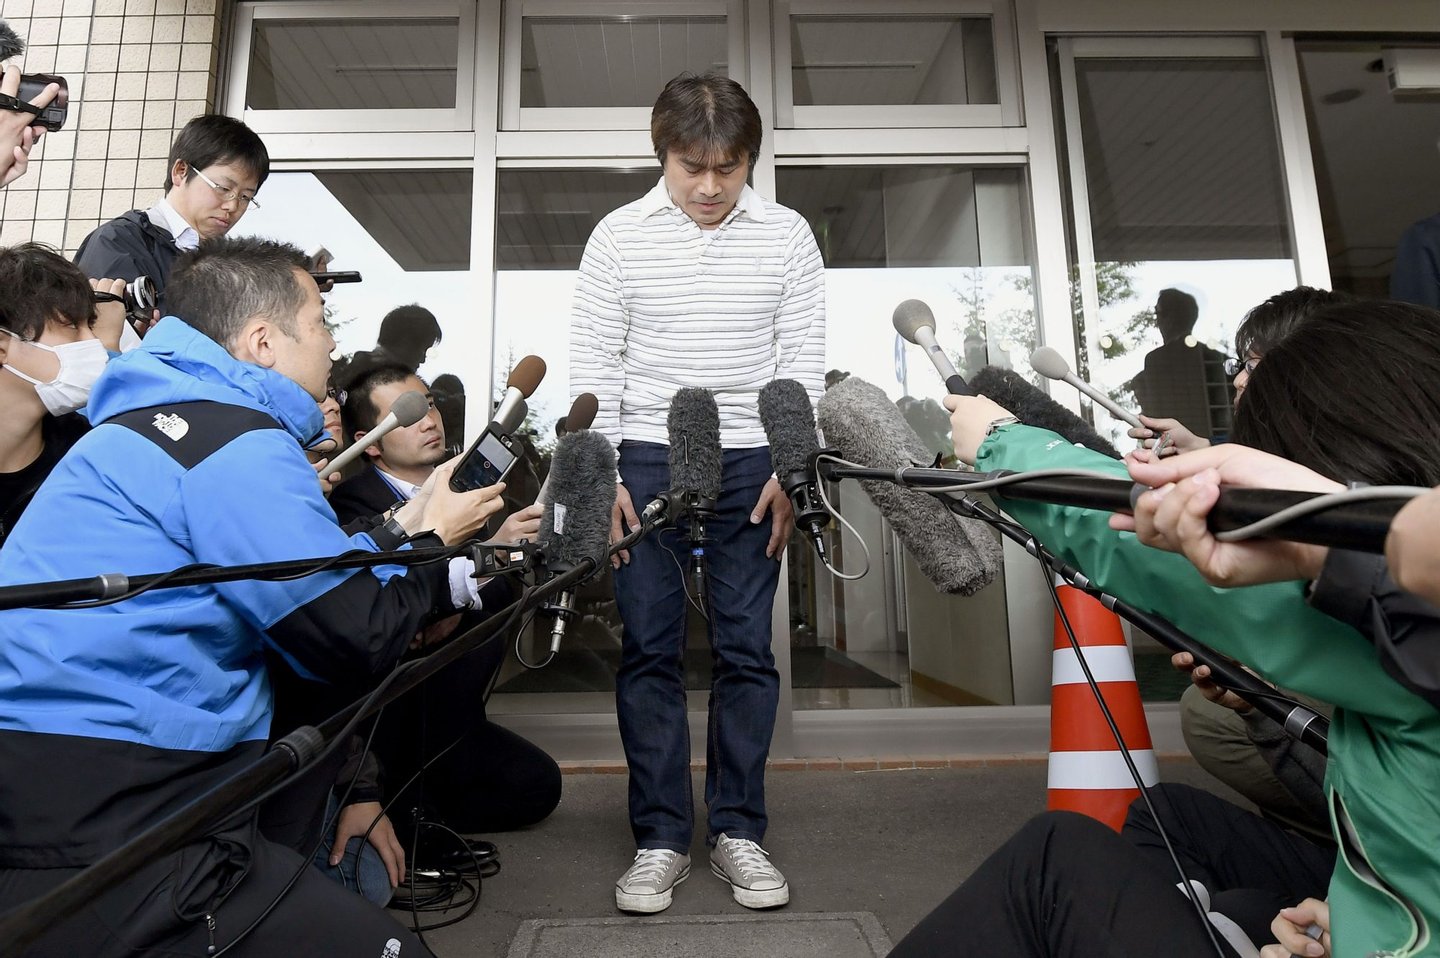 Takayuki Tanooka meets with reporters on June 3, 2016, in the northern Japan city of Hakodate, after his 7-year-old son Yamato was found safe after being left behind in mountain forests on May 28 as punishment for misbehaving. The 44-year-old father apologized for trouble he caused. (Photo by Kyodo News via Getty Images)